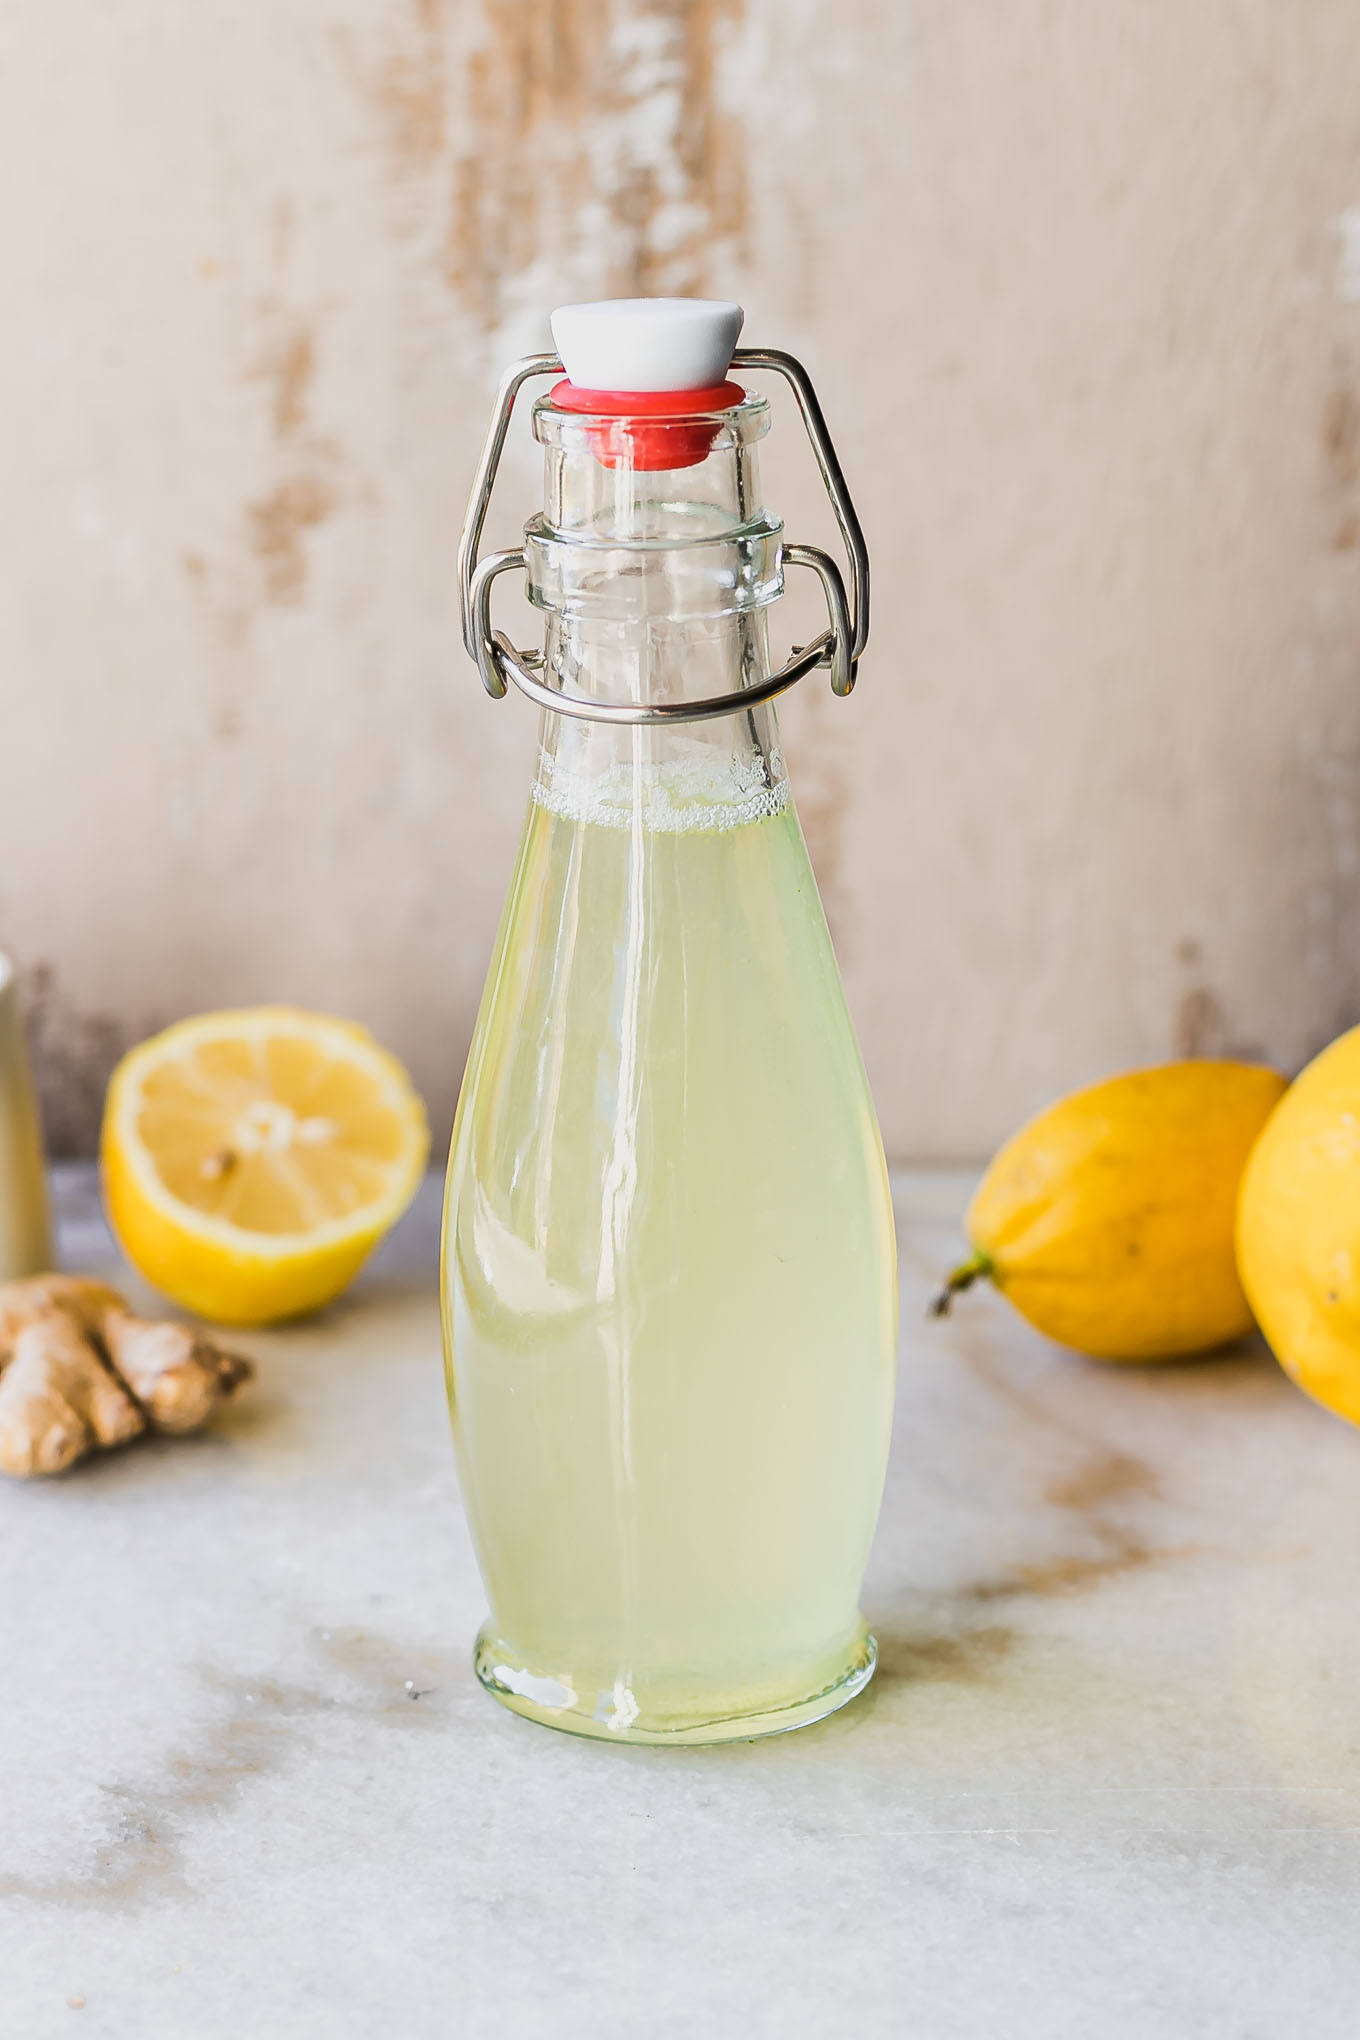 lemon and ginger infused simple syrup in a glass jar on a table with lemons and ginger